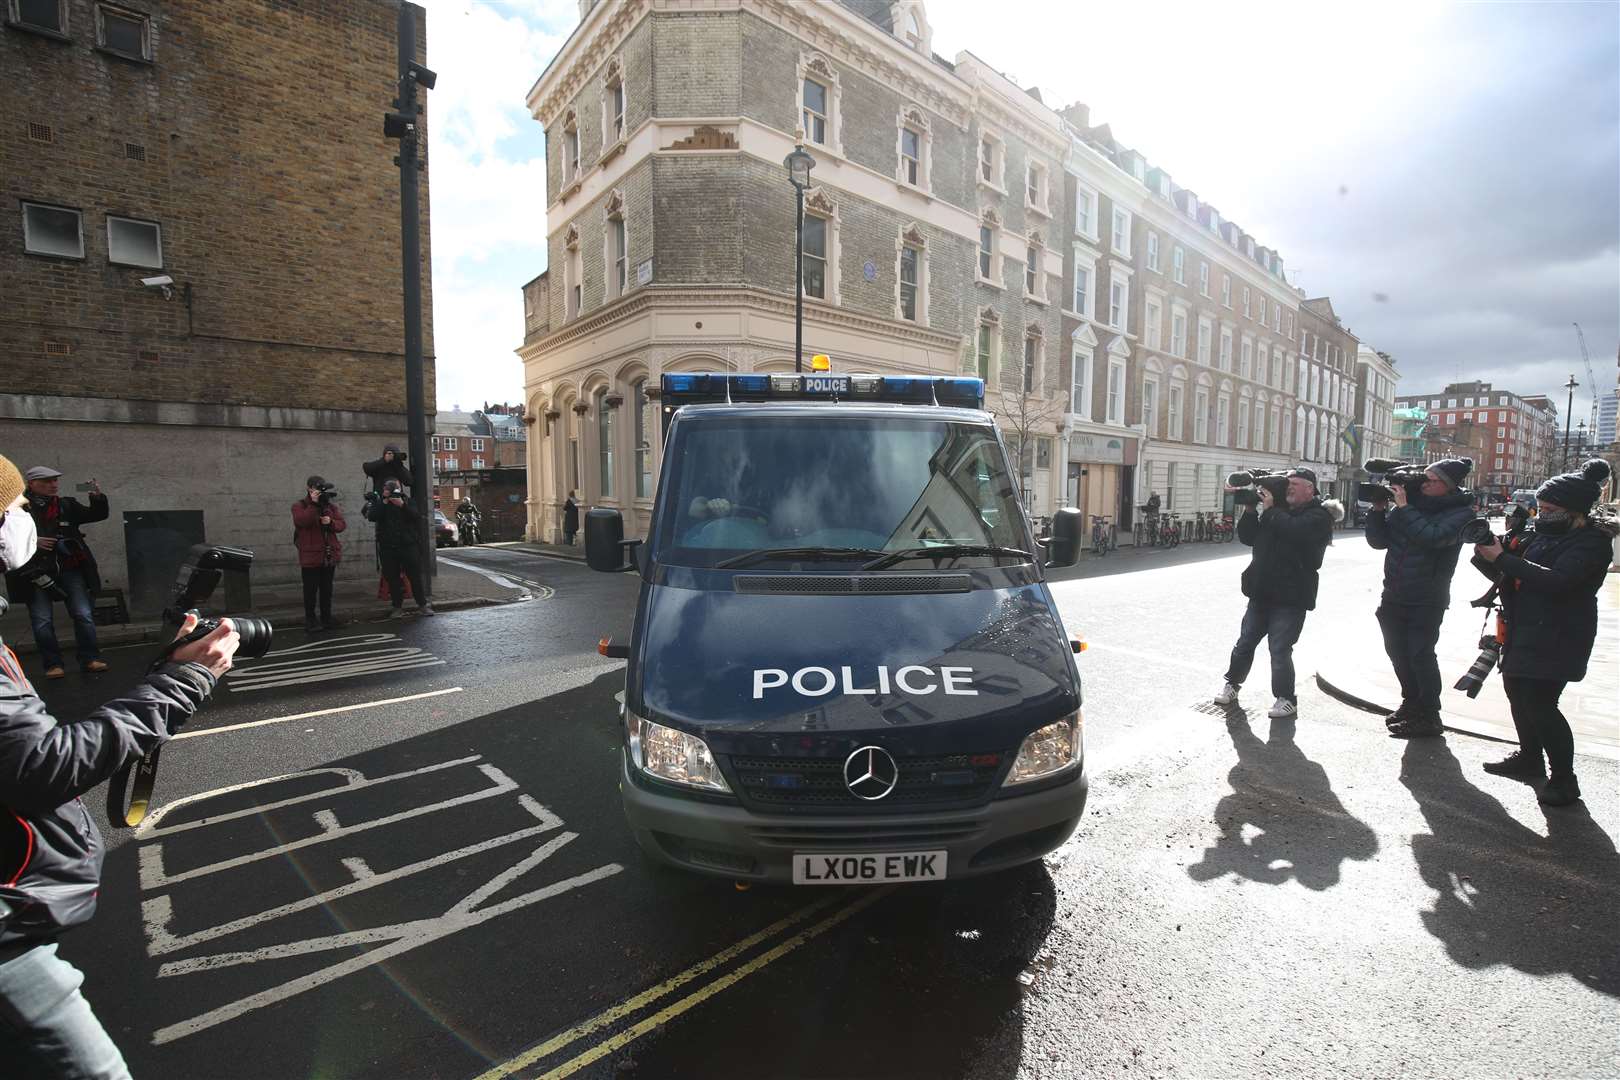 A police van arrives at Westminster Magistrates’ Court on Saturday morning (Steve Parsons/PA)